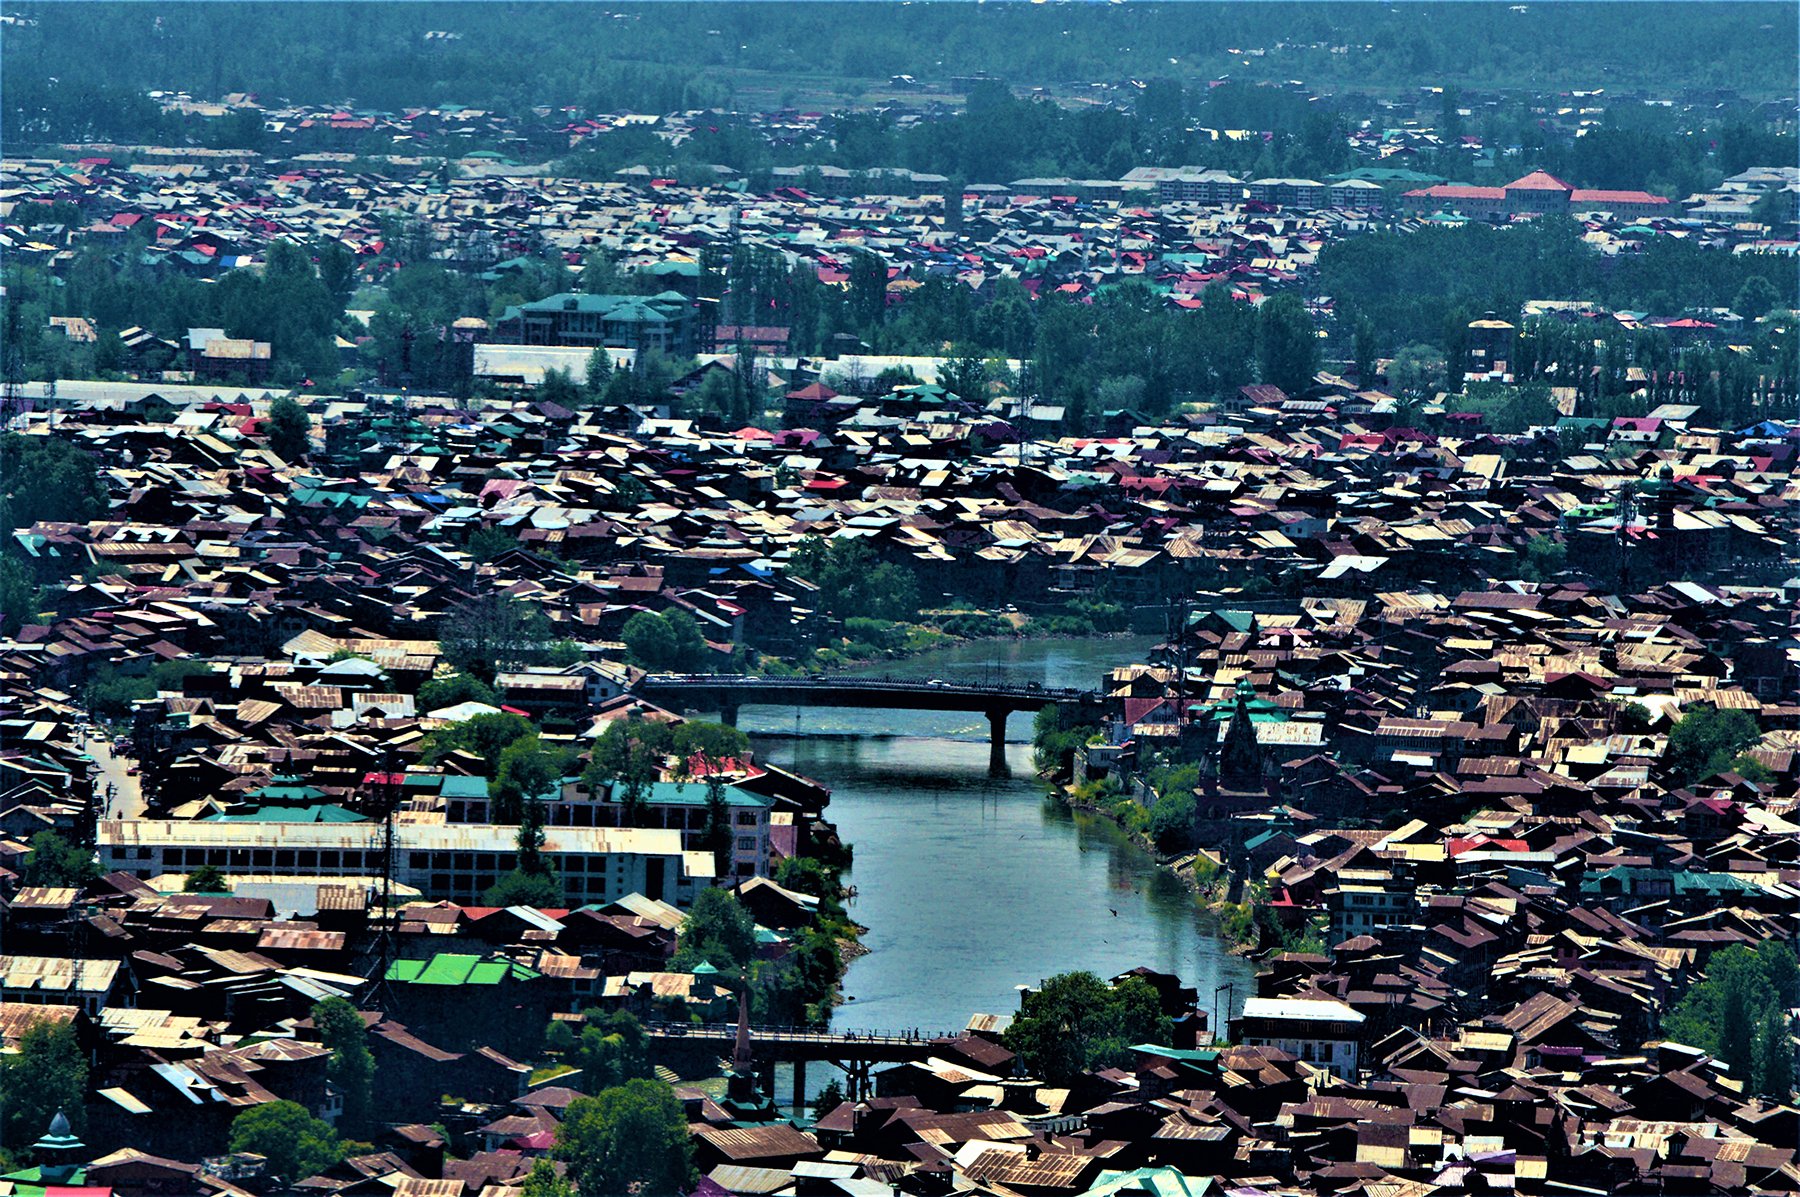 <p>The Jhelum river flows through the district of Srinagar, its floodplains choked with official and unofficial encroachments [Image by: Athar Parvaiz]</p>